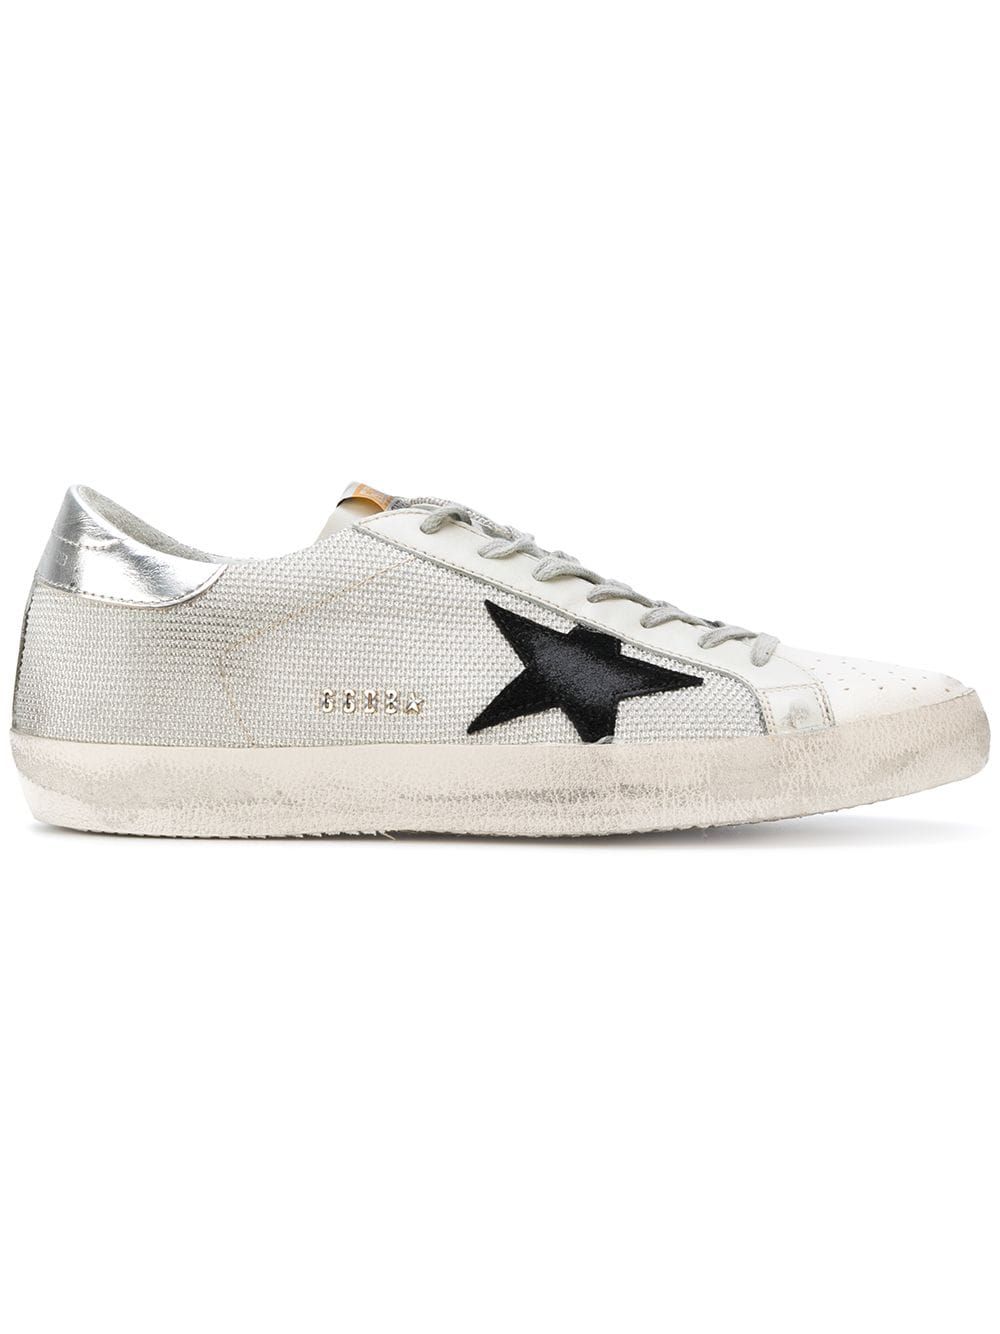 Golden Goose Deluxe Brand May sneakers - Grey | FarFetch US